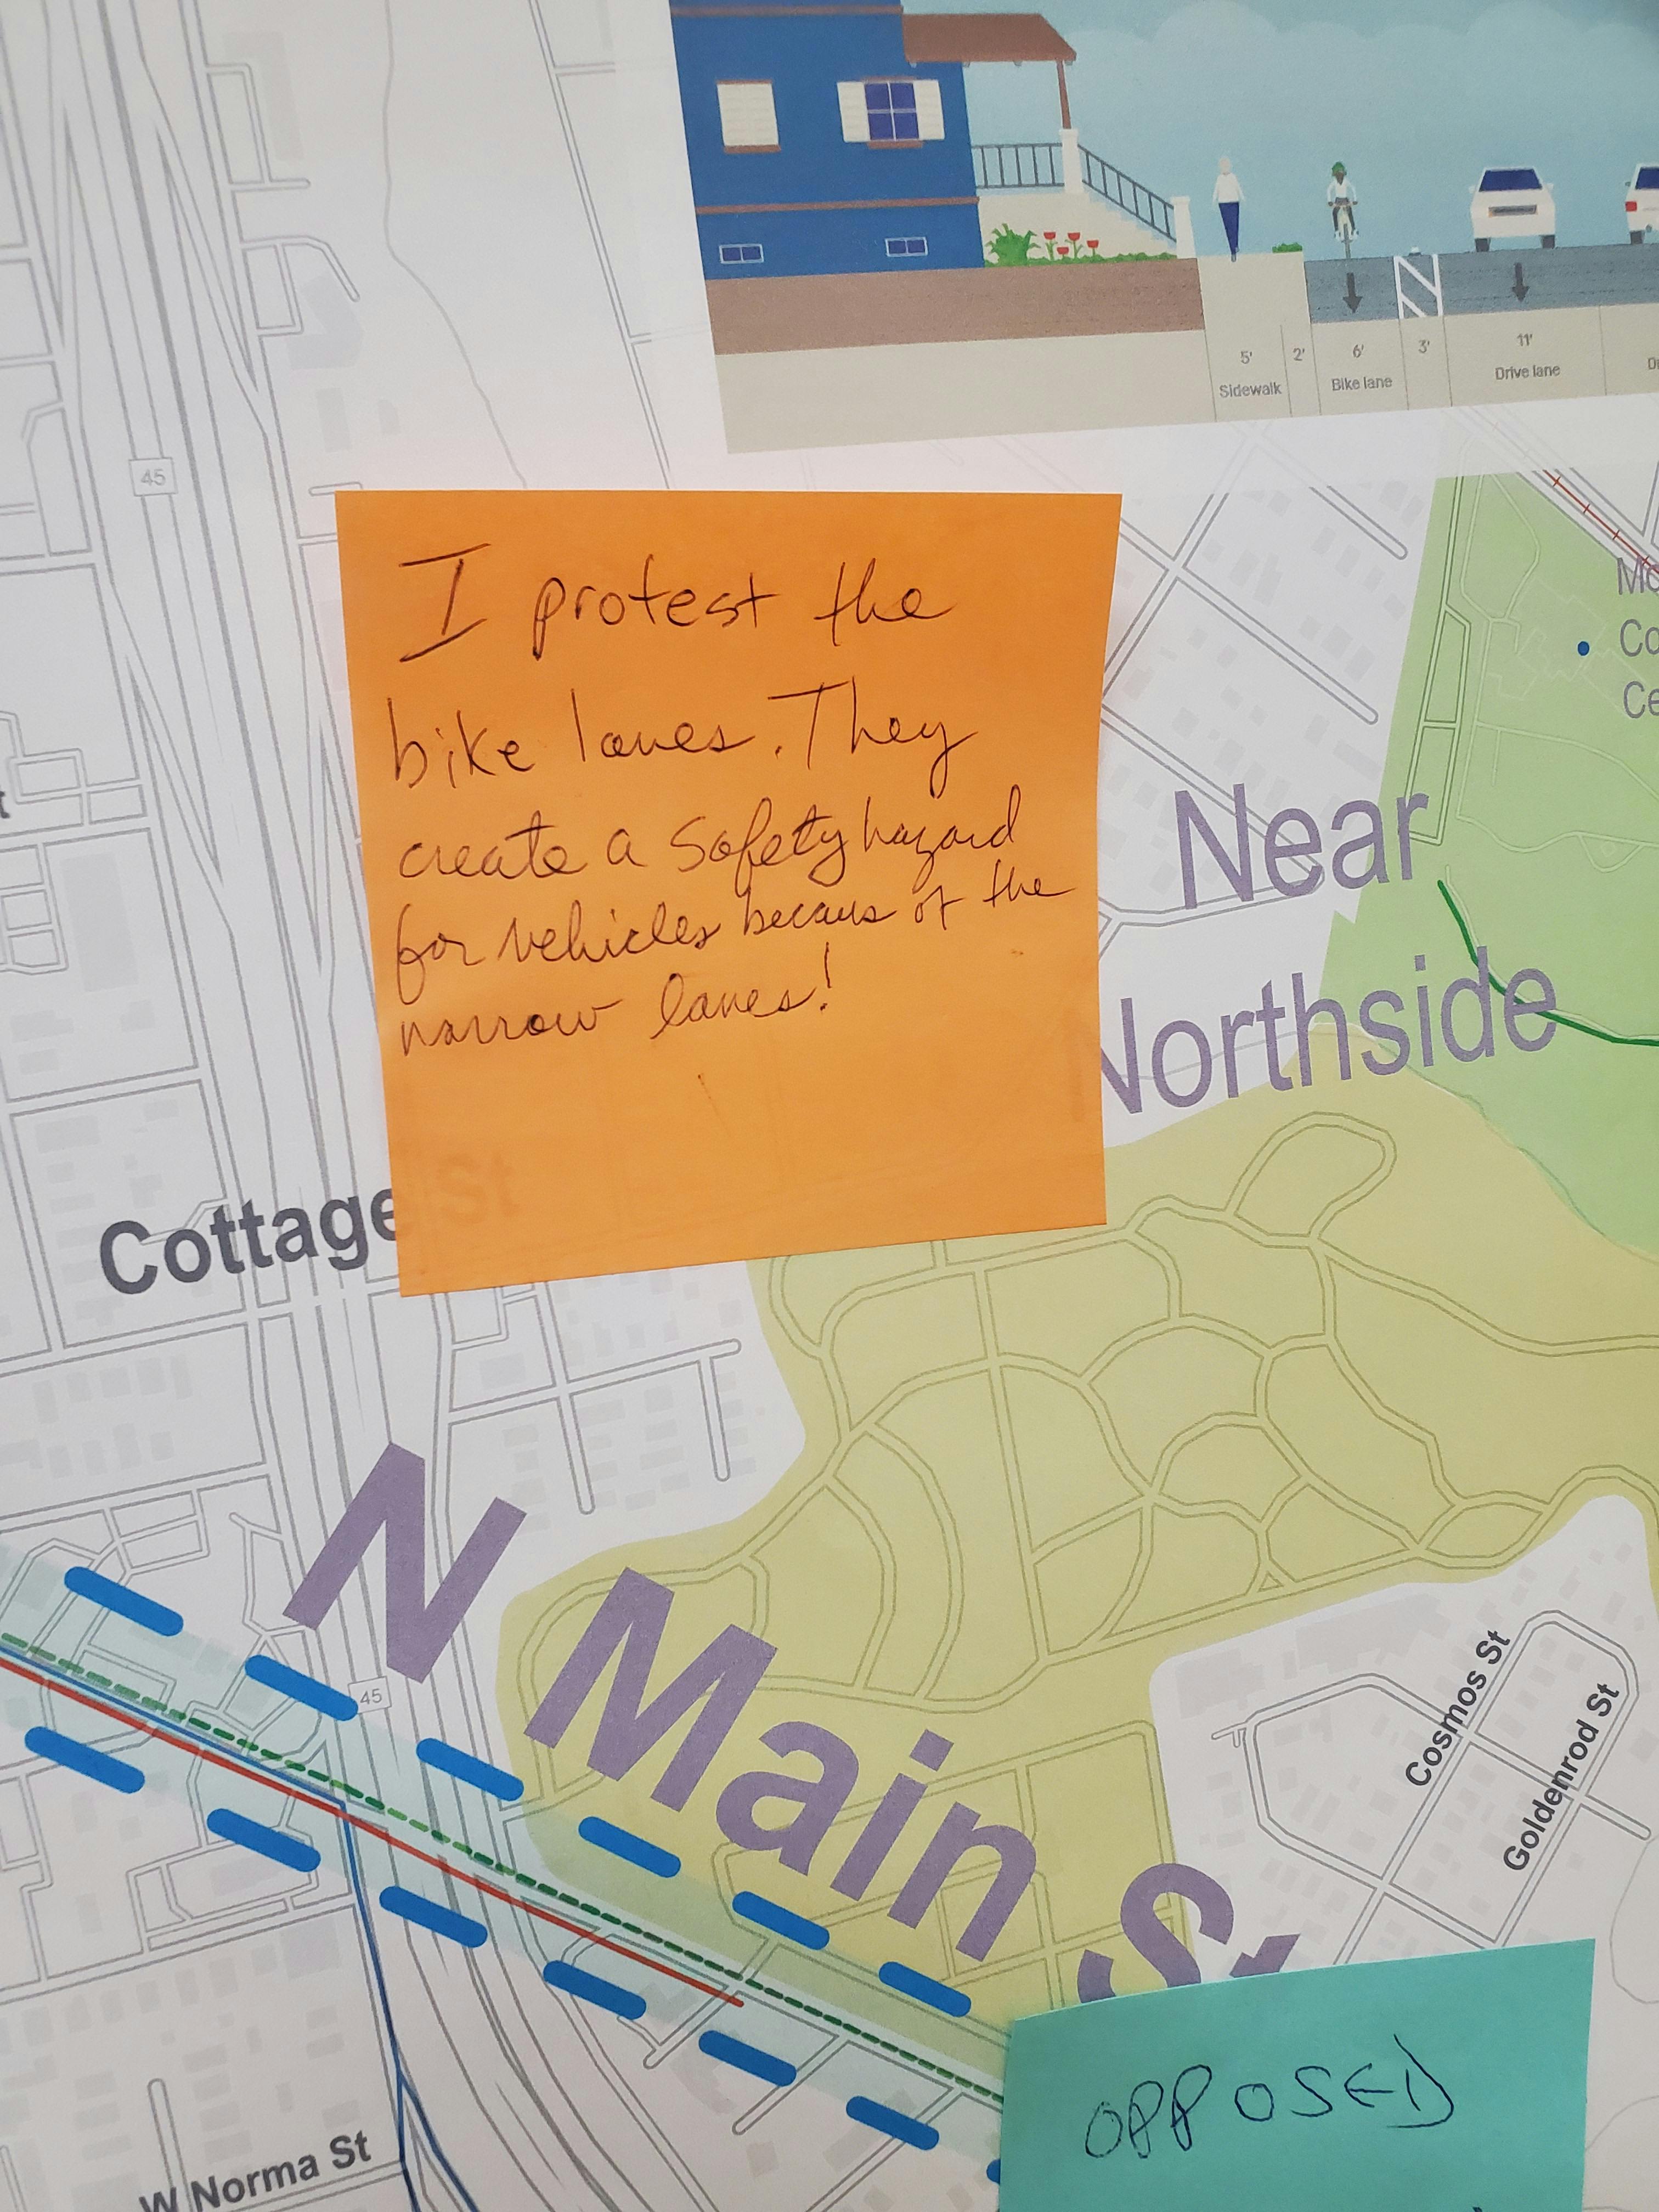 Comment on Proposed Bikeway and Safety Improvements Posterboard 1